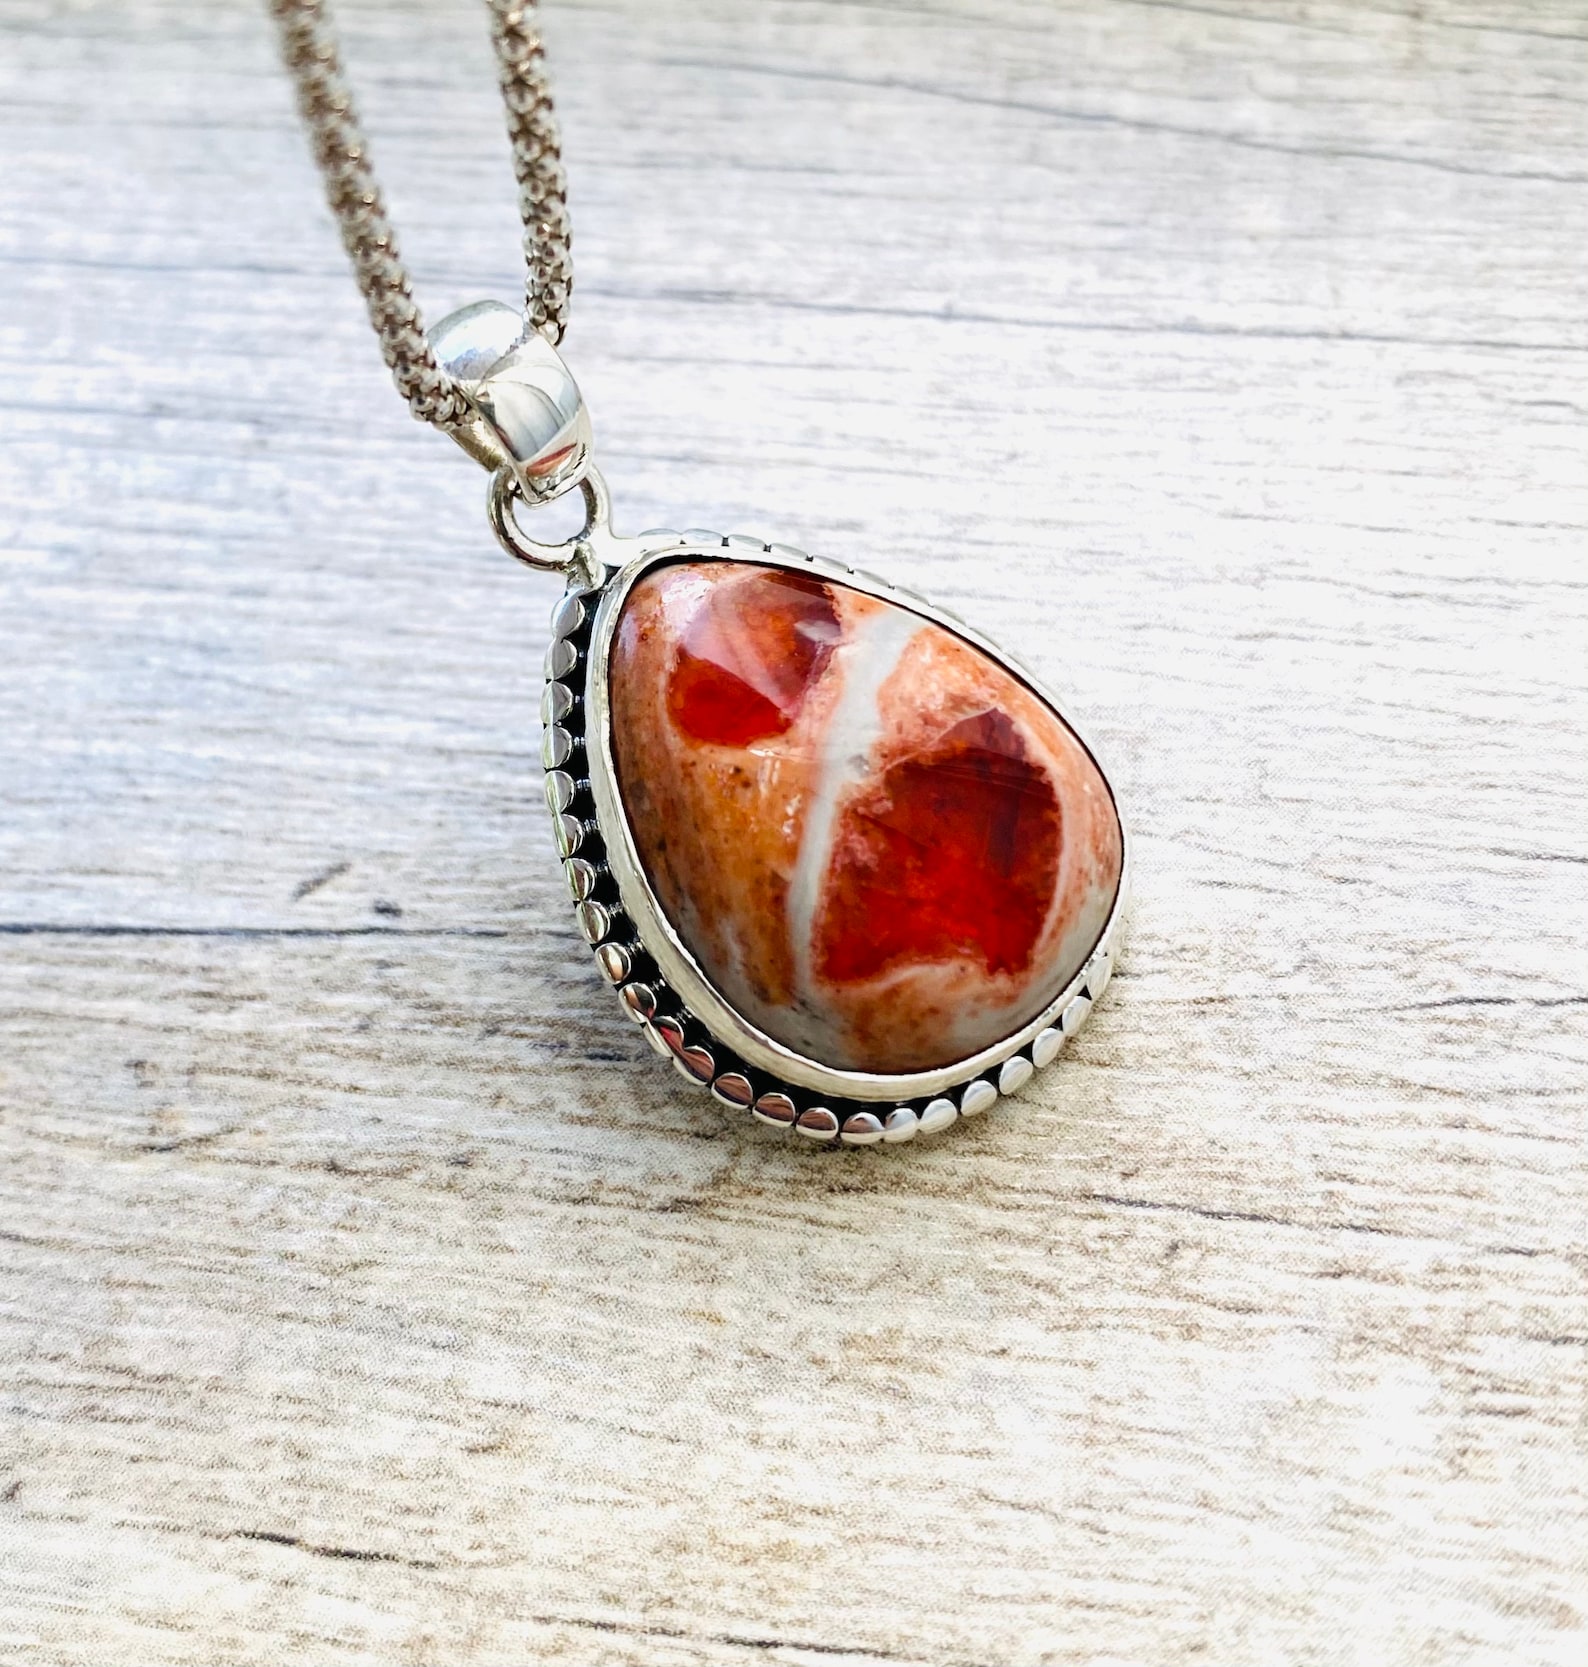 Natural Mexican Fire Opal Pendant Genuine Mexican Fire Opal Etsy